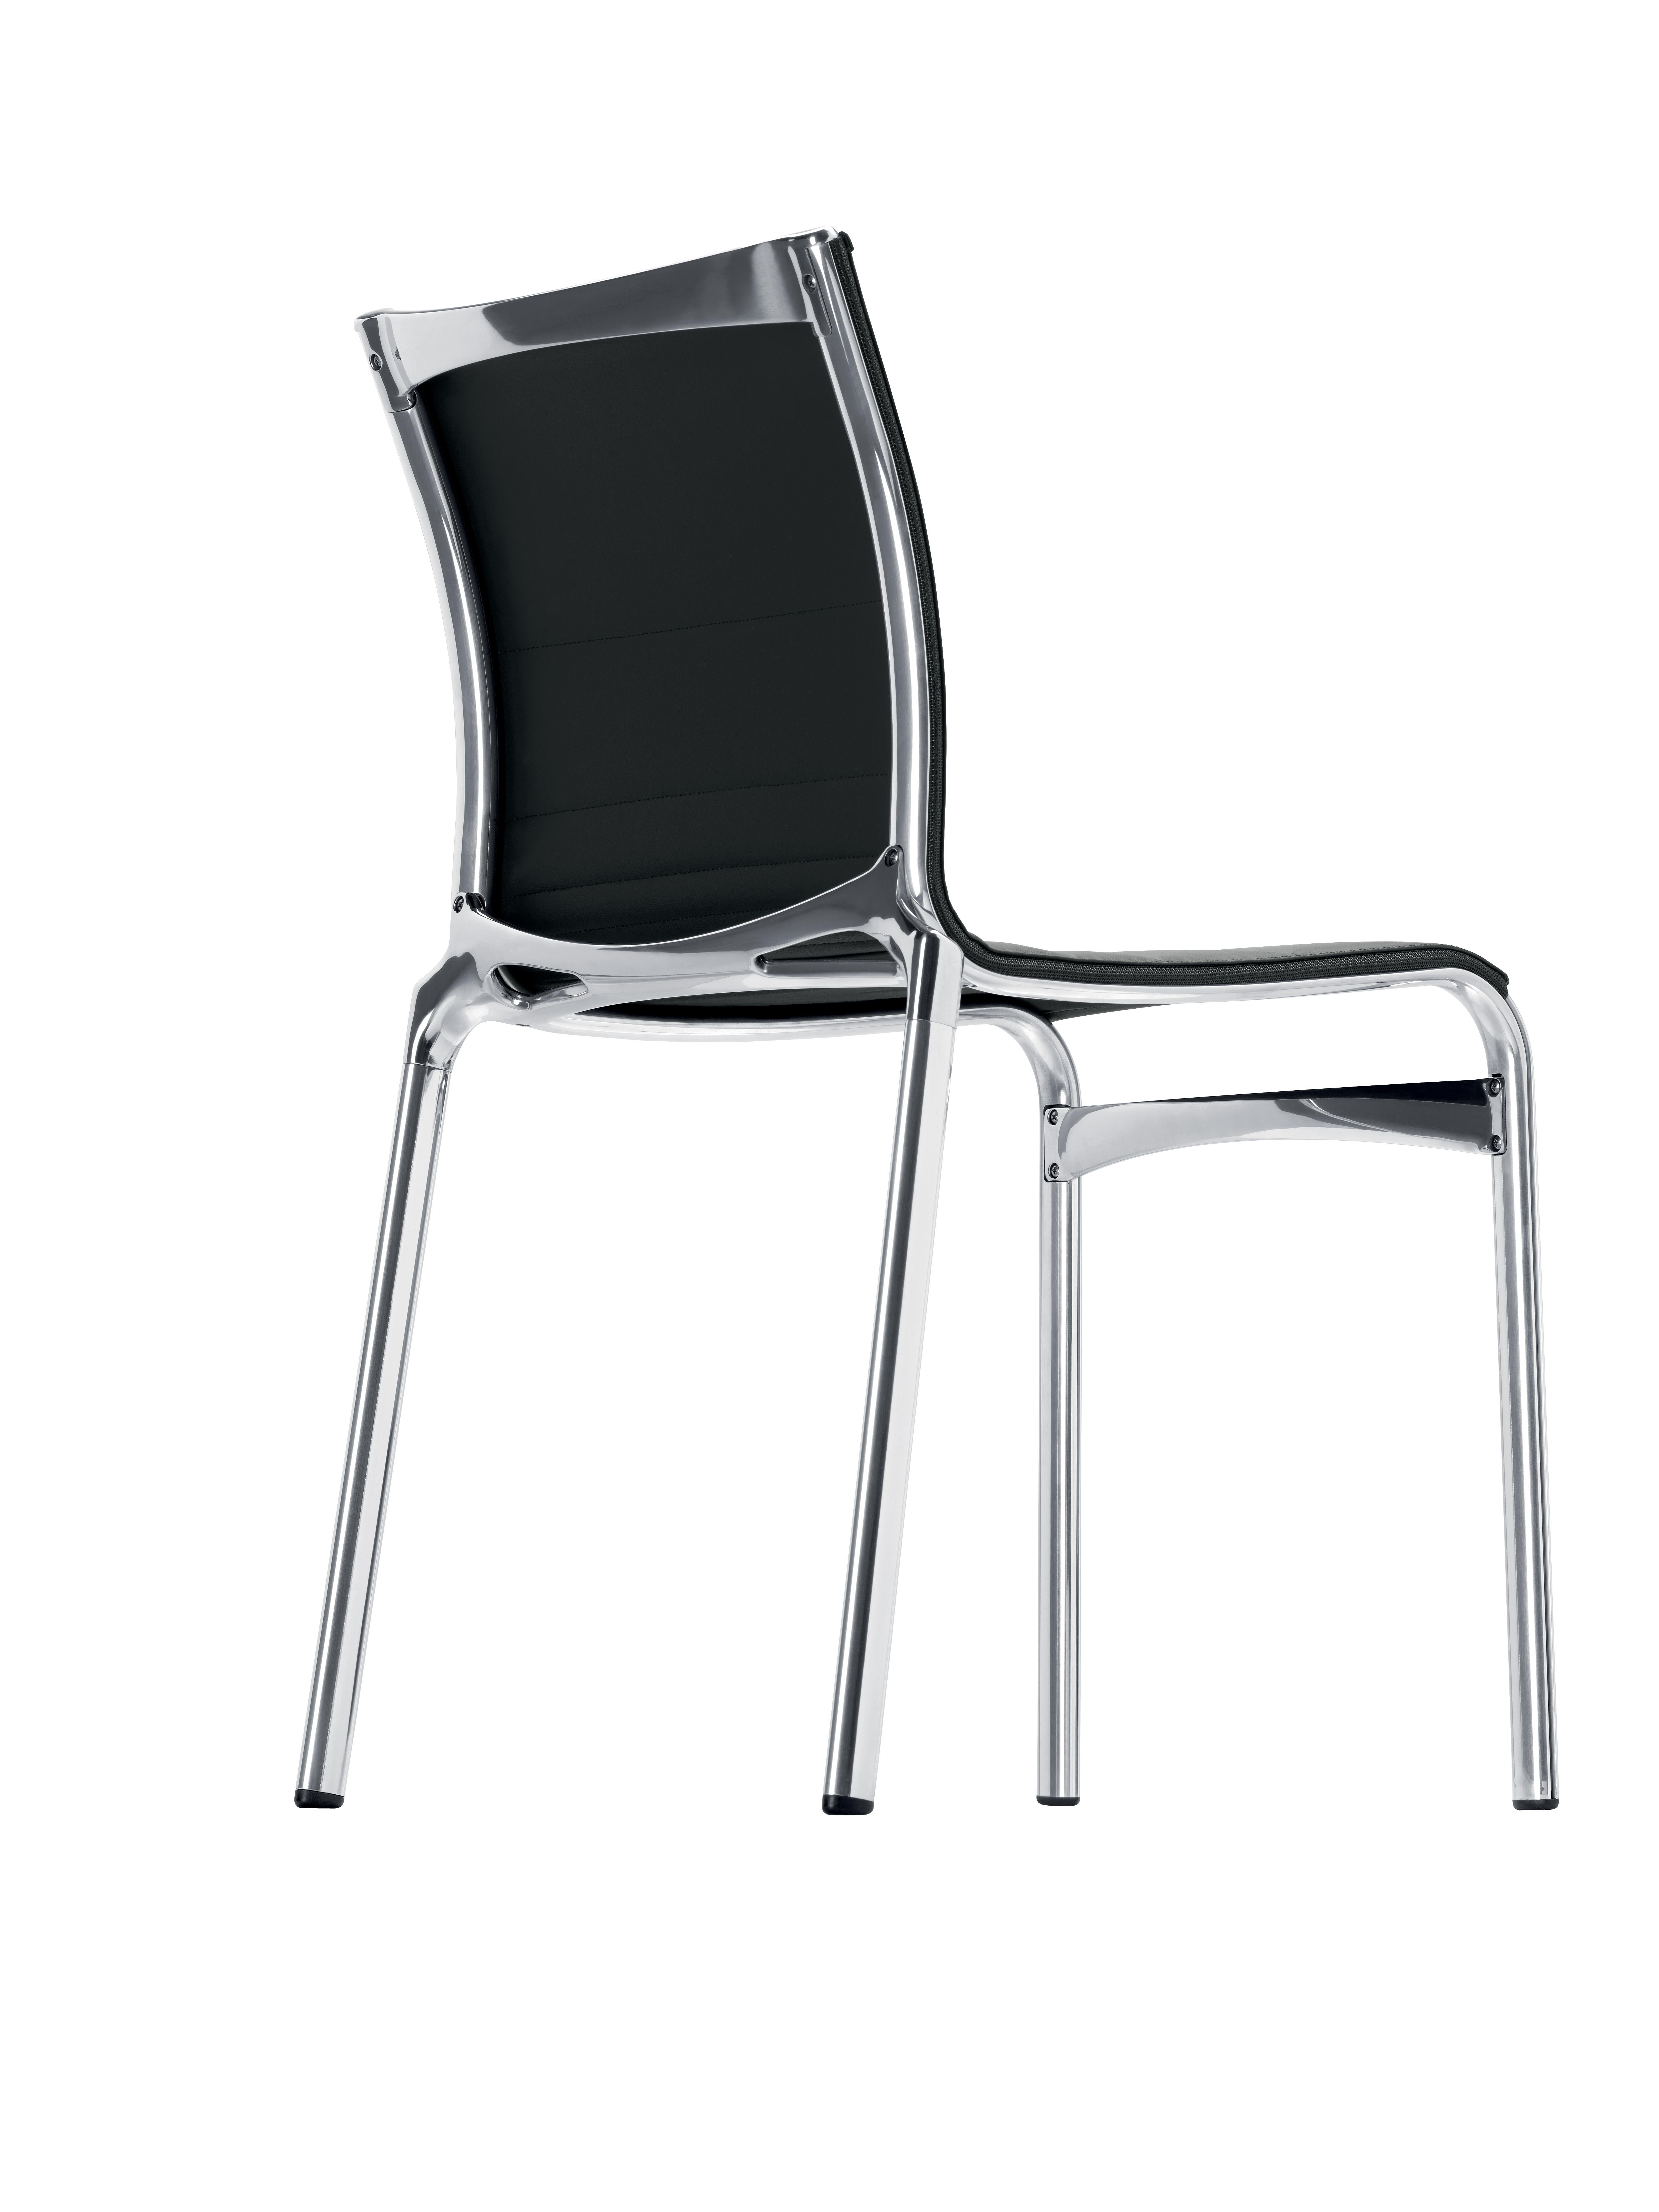 Alias Bigframe 44 Chair in Black Leather Upholstery with Chromed Aluminium Frame by Alberto Meda

Stacking chair with structure made of extruded aluminium profile and die-cast aluminium elements. Seat and back in fire retardant PVC covered